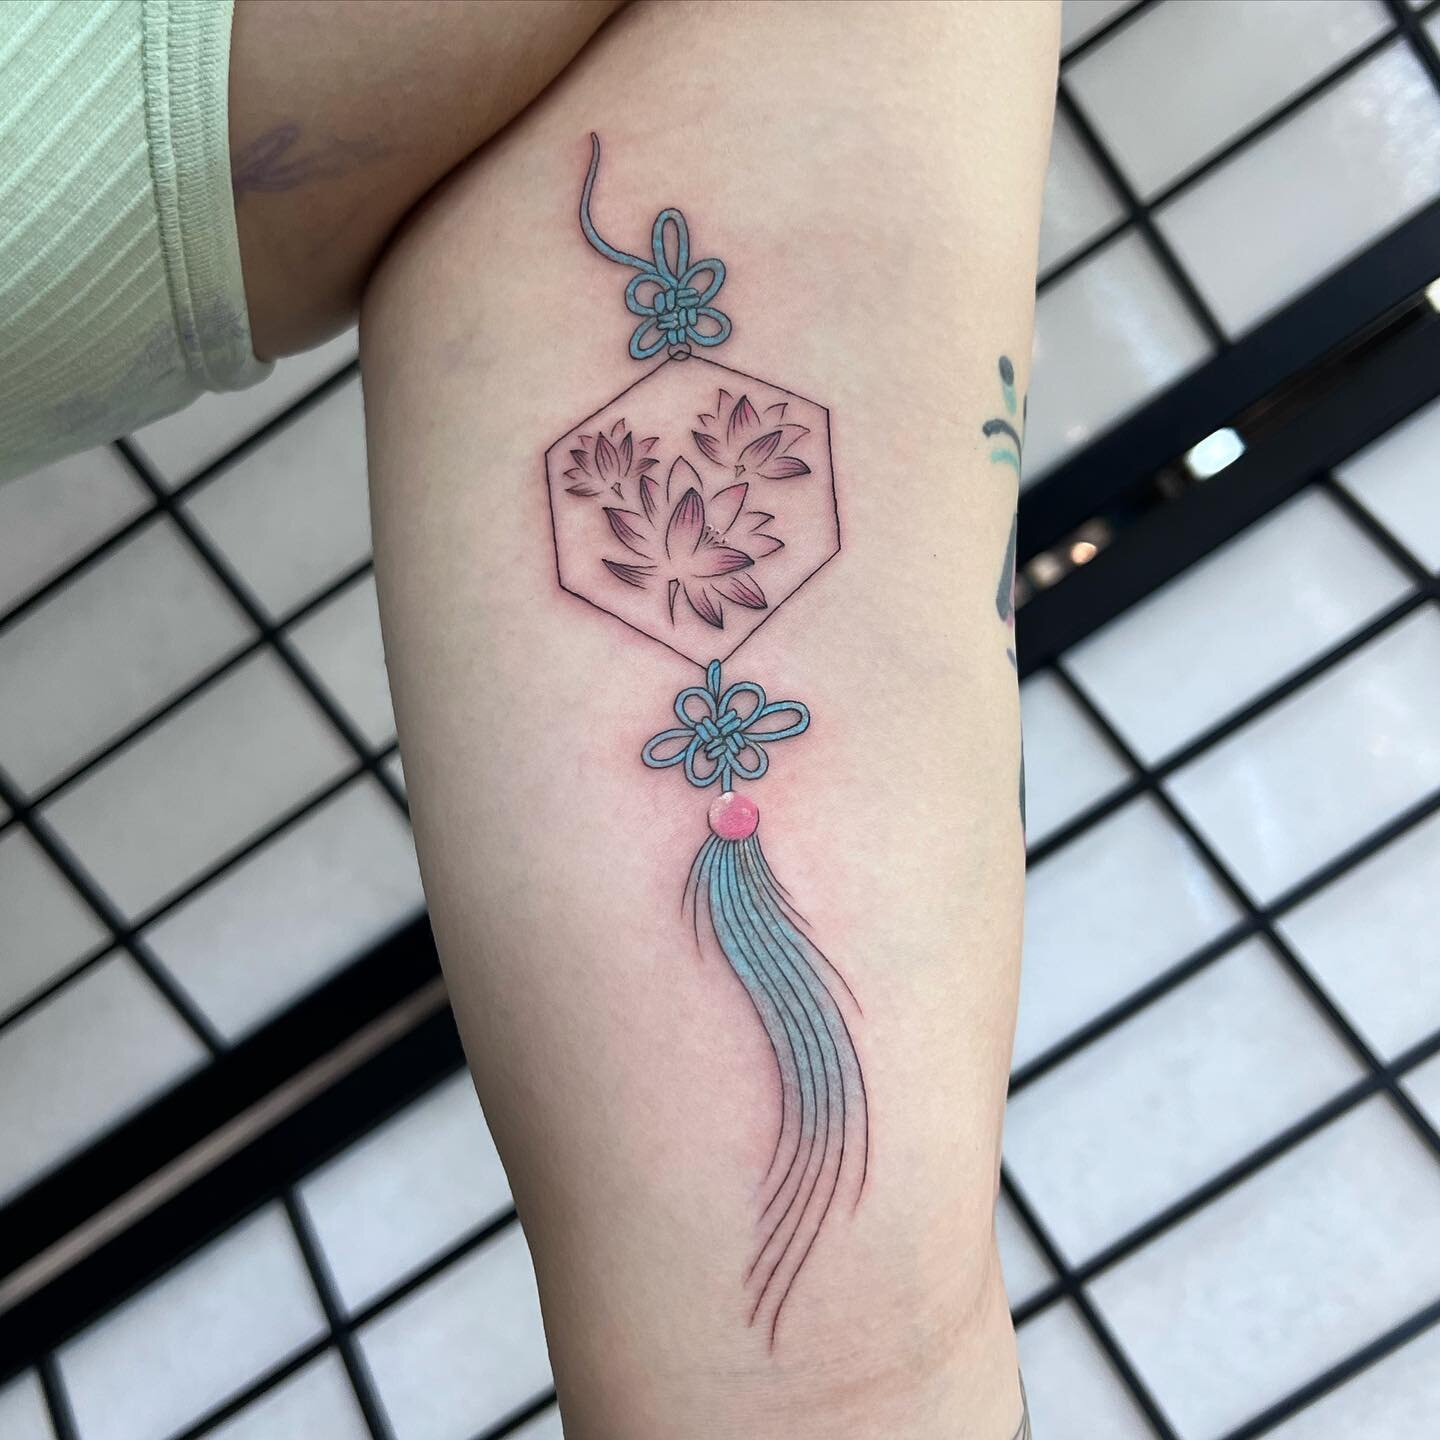 Fine line pastel pink and blue charm with lotus flowers! 🪷✨ #queer #queerart #queerartist #queertattooer #queertattooartist #qttr #milwaukee #milwaukeetattoo #milwaukeetattoos #milwaukeetattooartist #wisconsintattooartists #finelinetattoo #finelinet